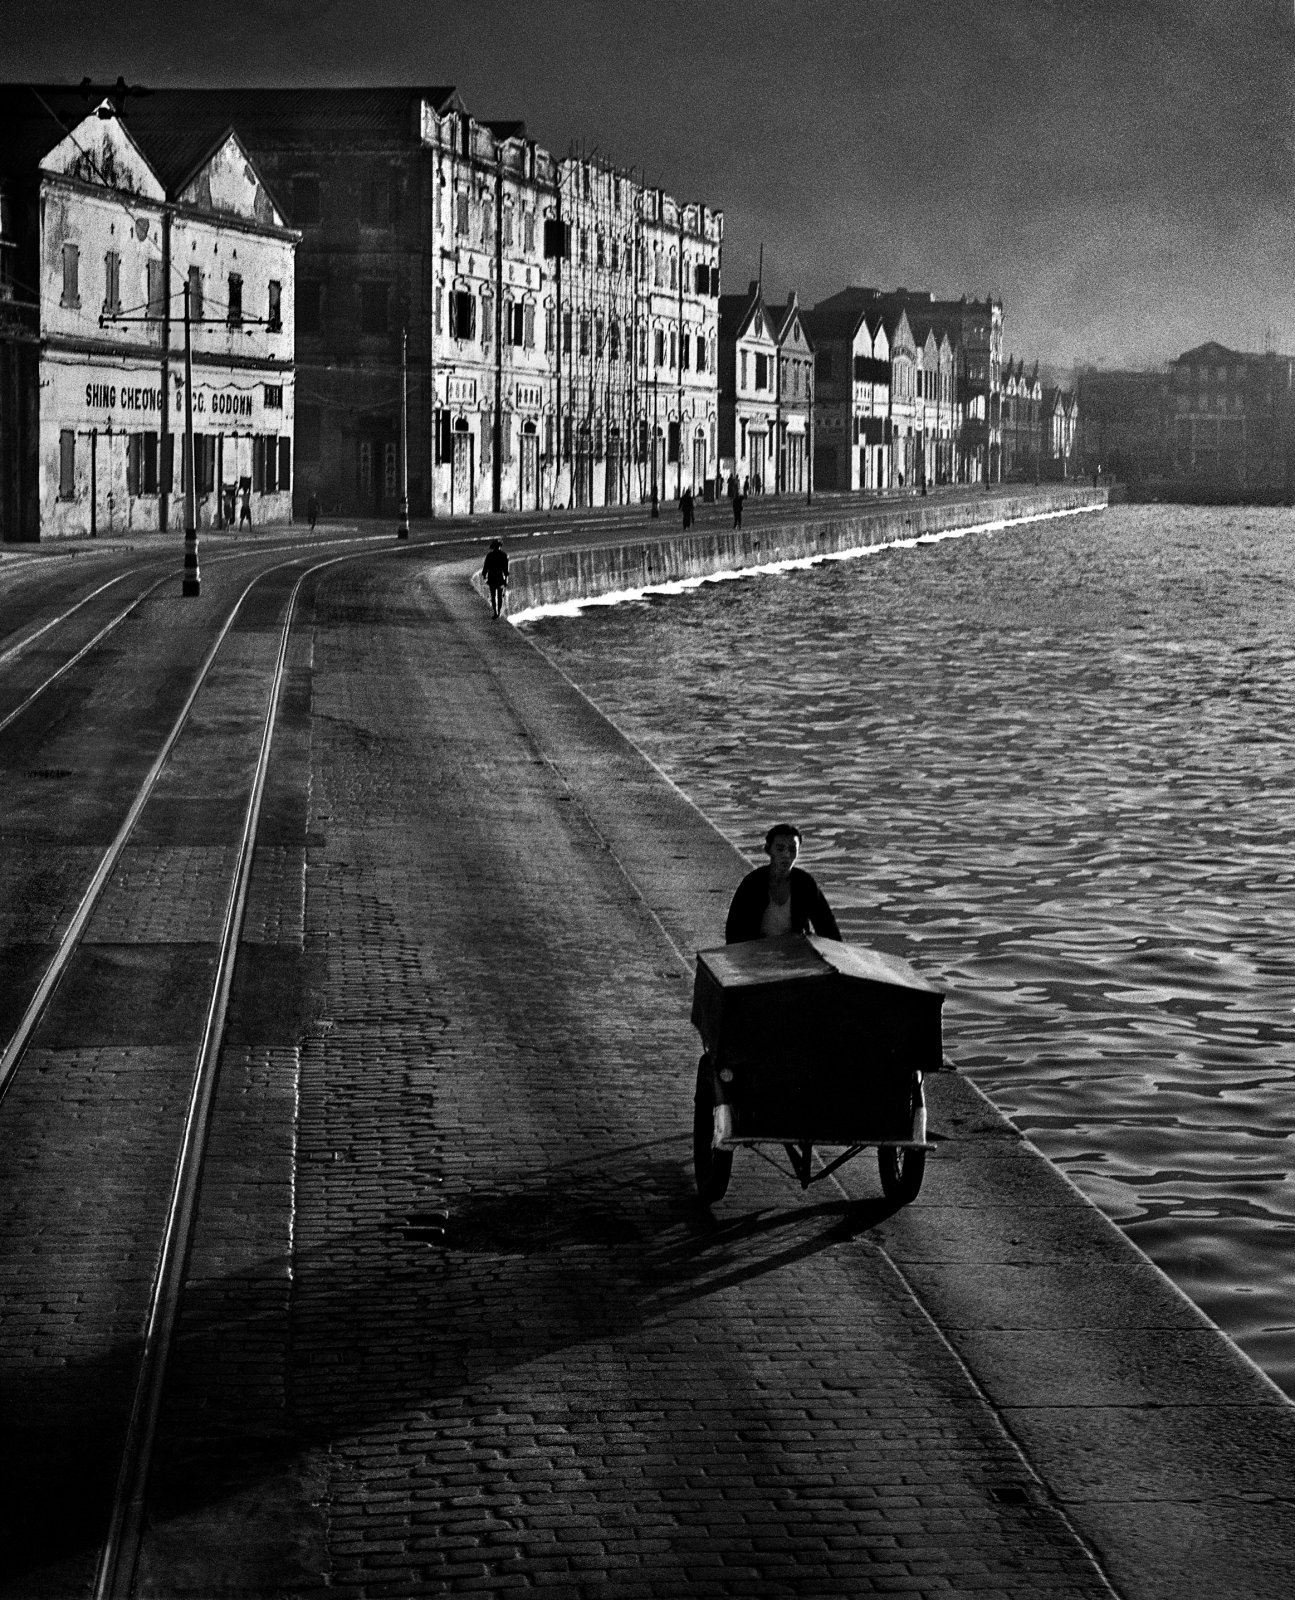 Fan Ho 'As Evening Hurries By(日暮途遠)' Hong Kong 1955, courtesy of Blue Lotus Gallery